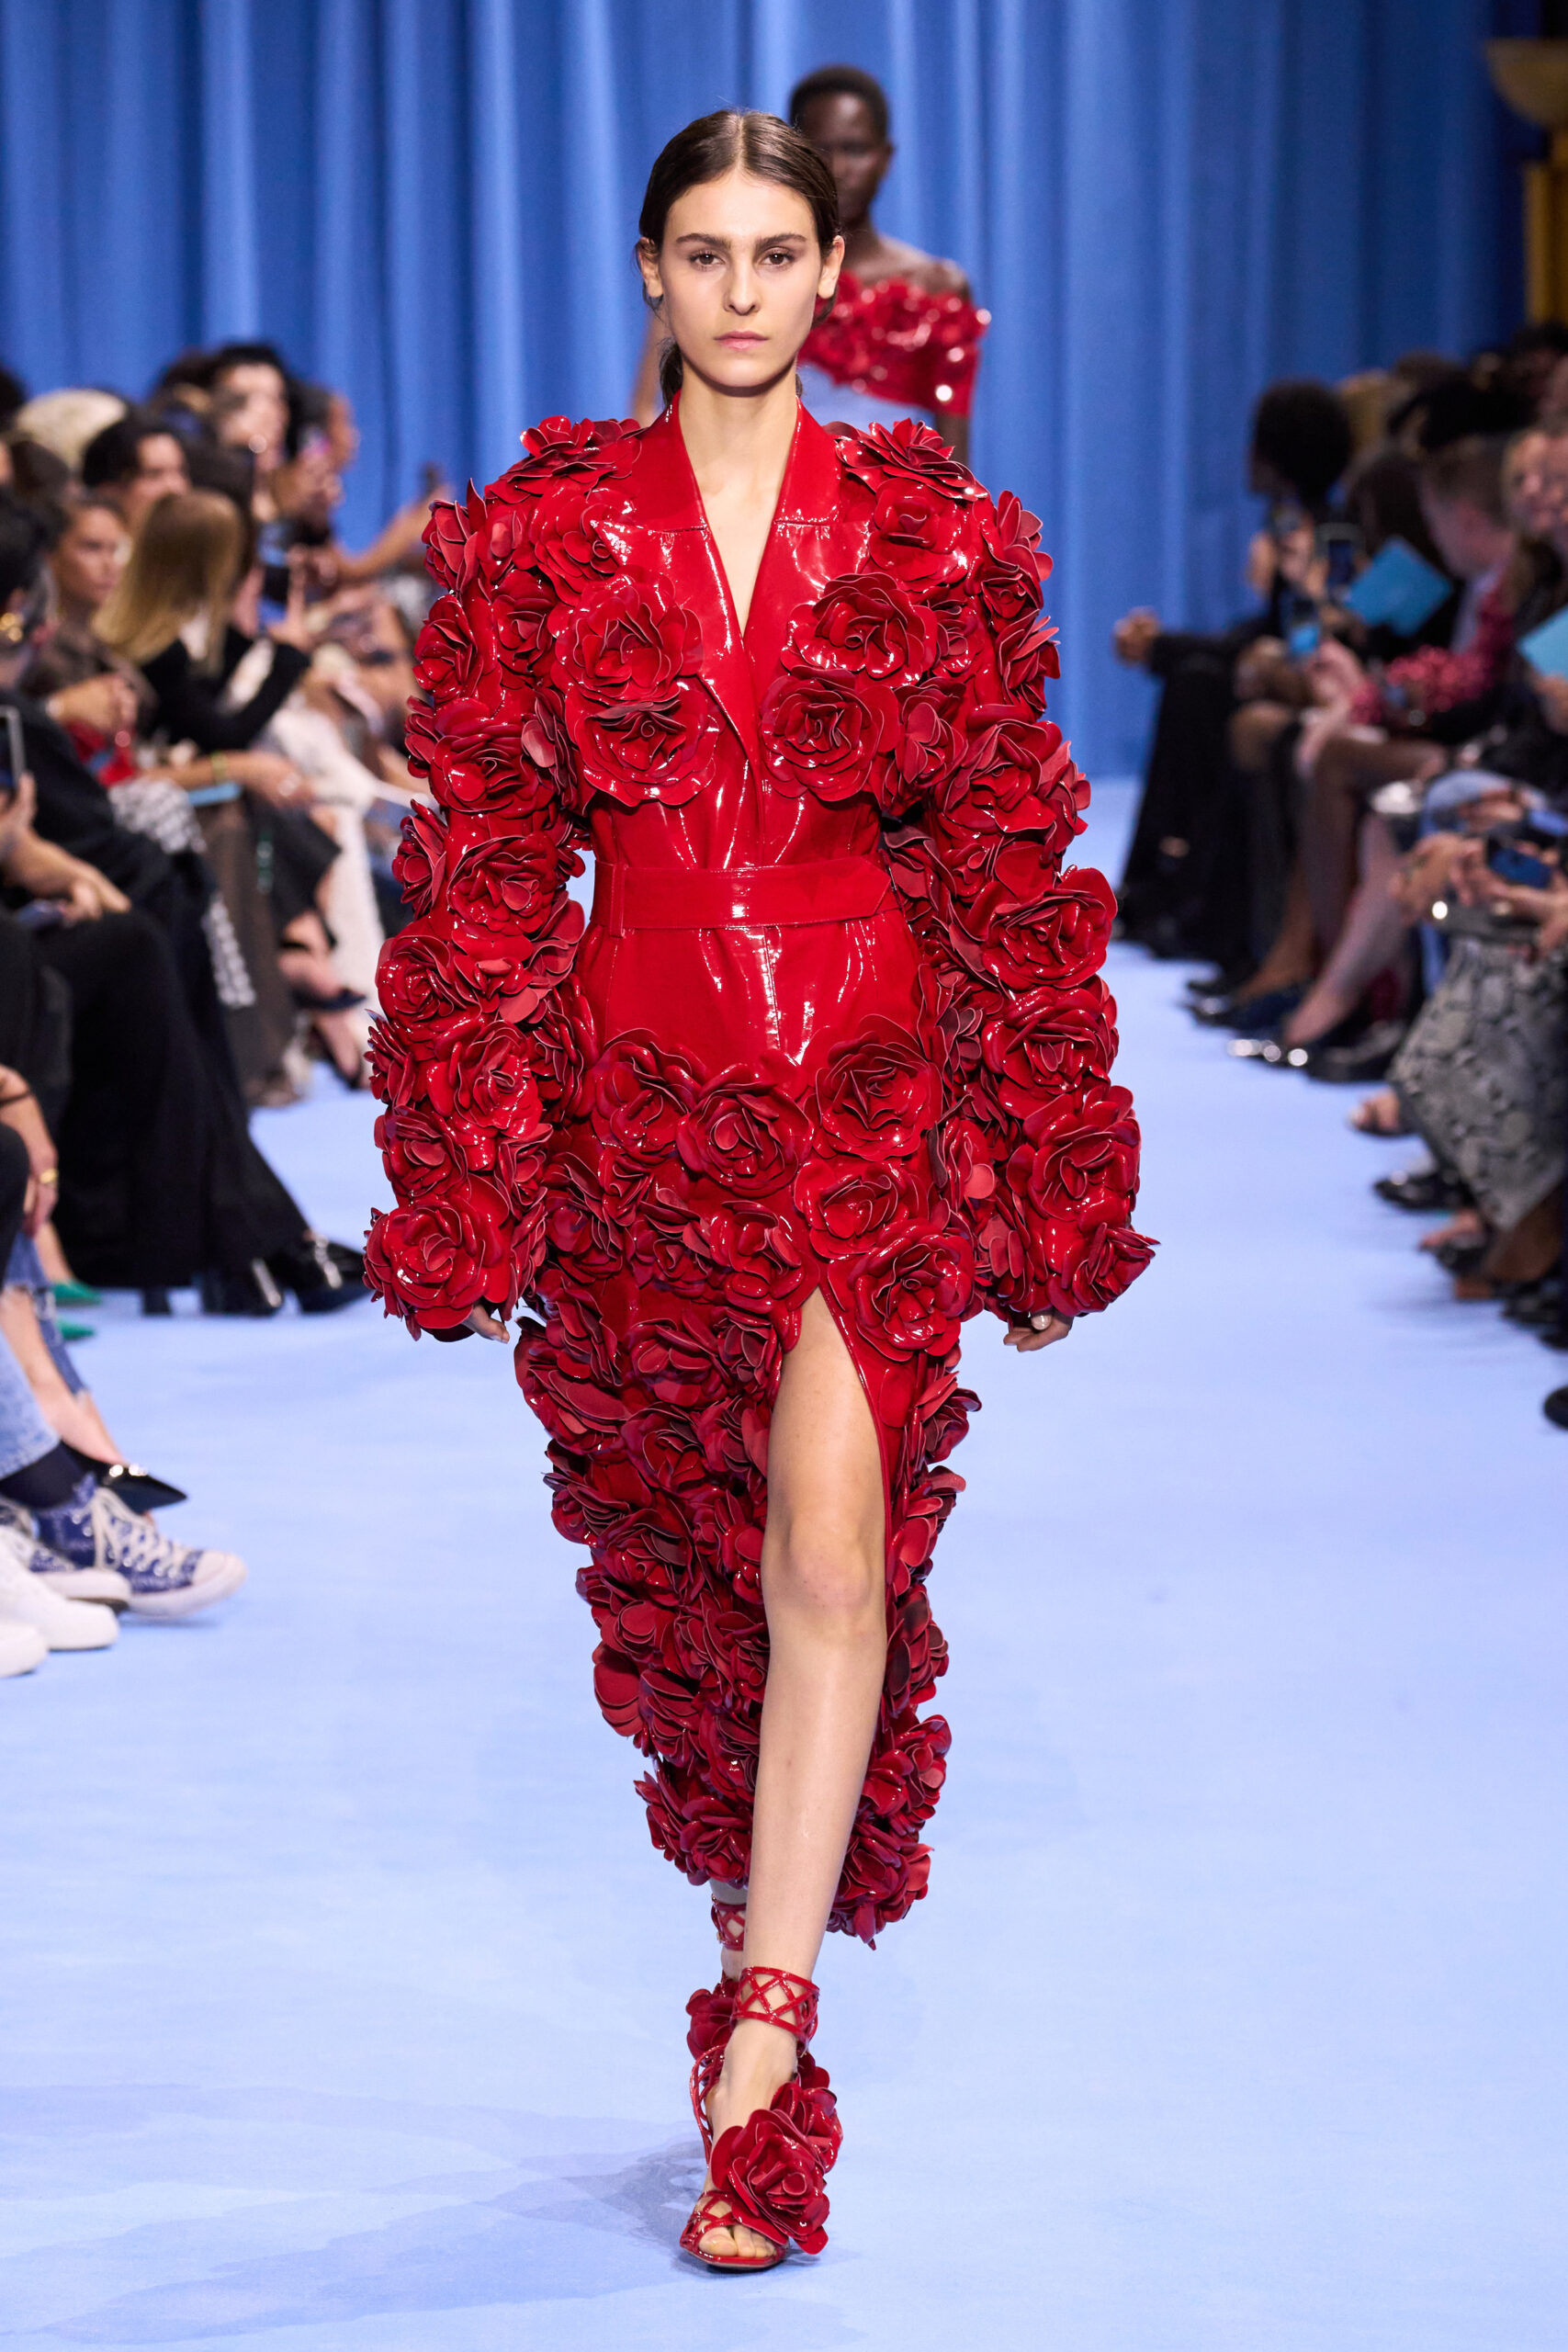 RUNWAY RECAP: 15 UNFORGETTABLE MOMENTS FROM PARIS FASHION WEEK SS24 ...